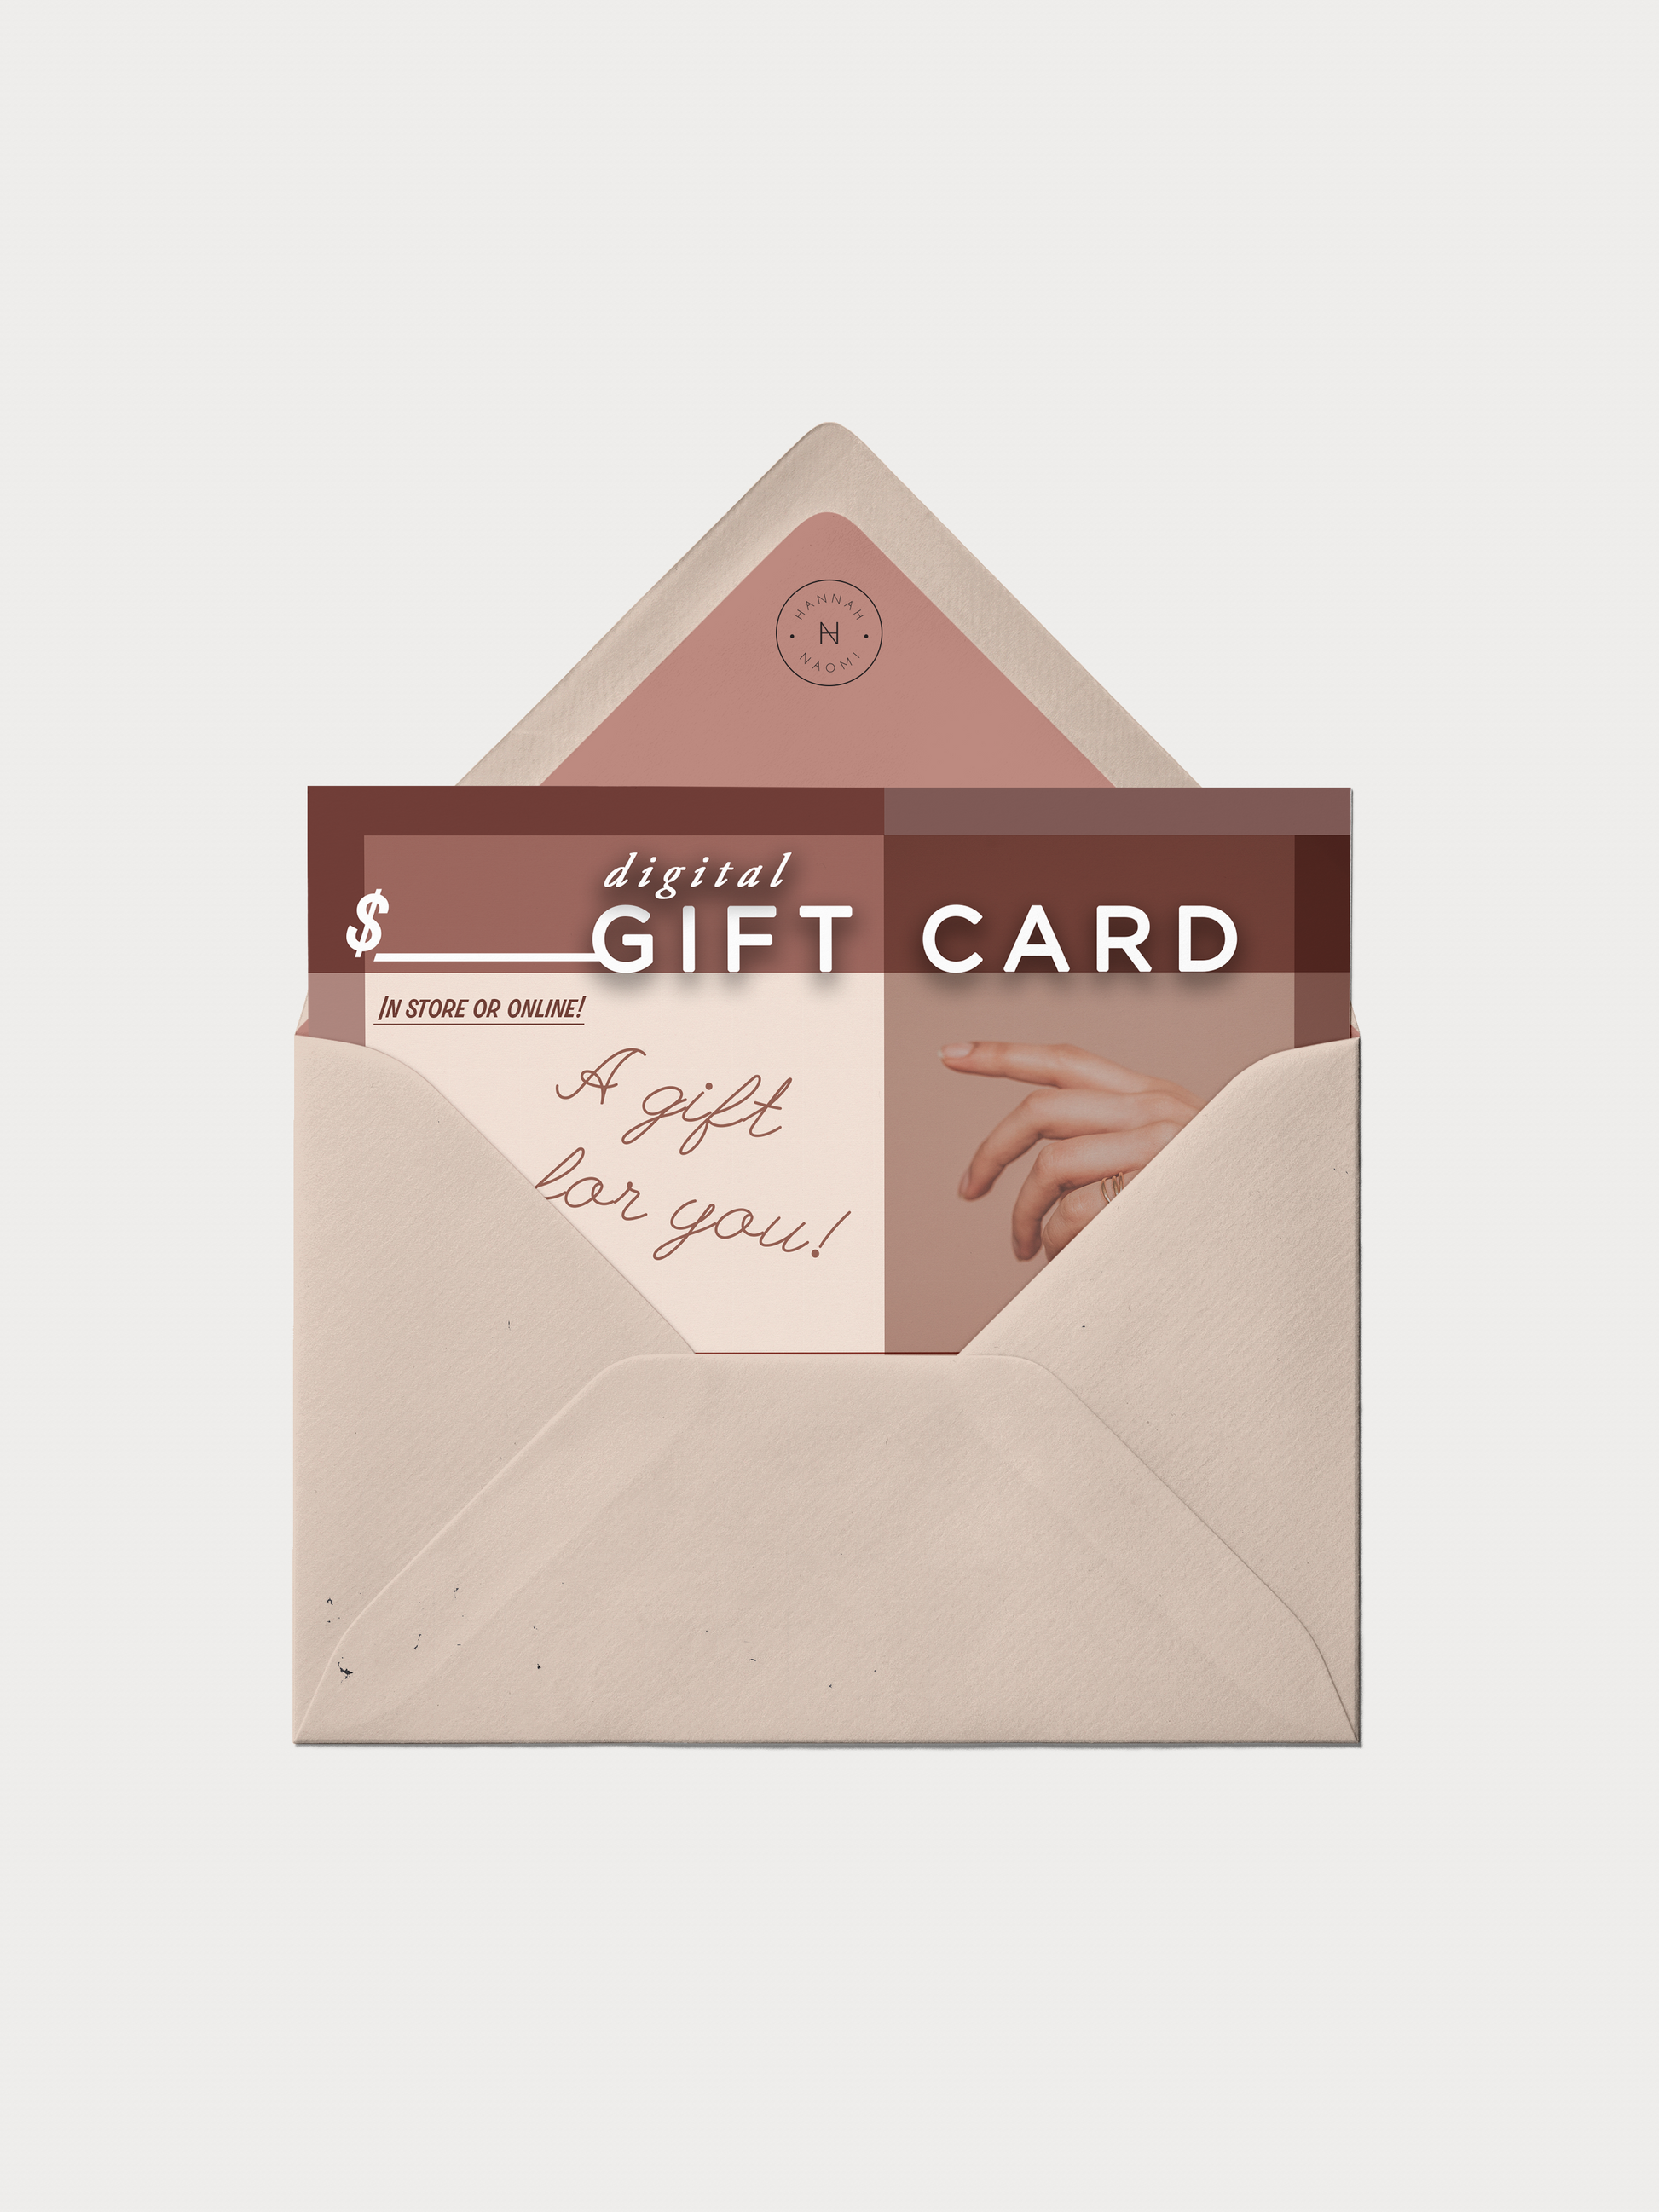 Mail a Gift Card, Giftshop